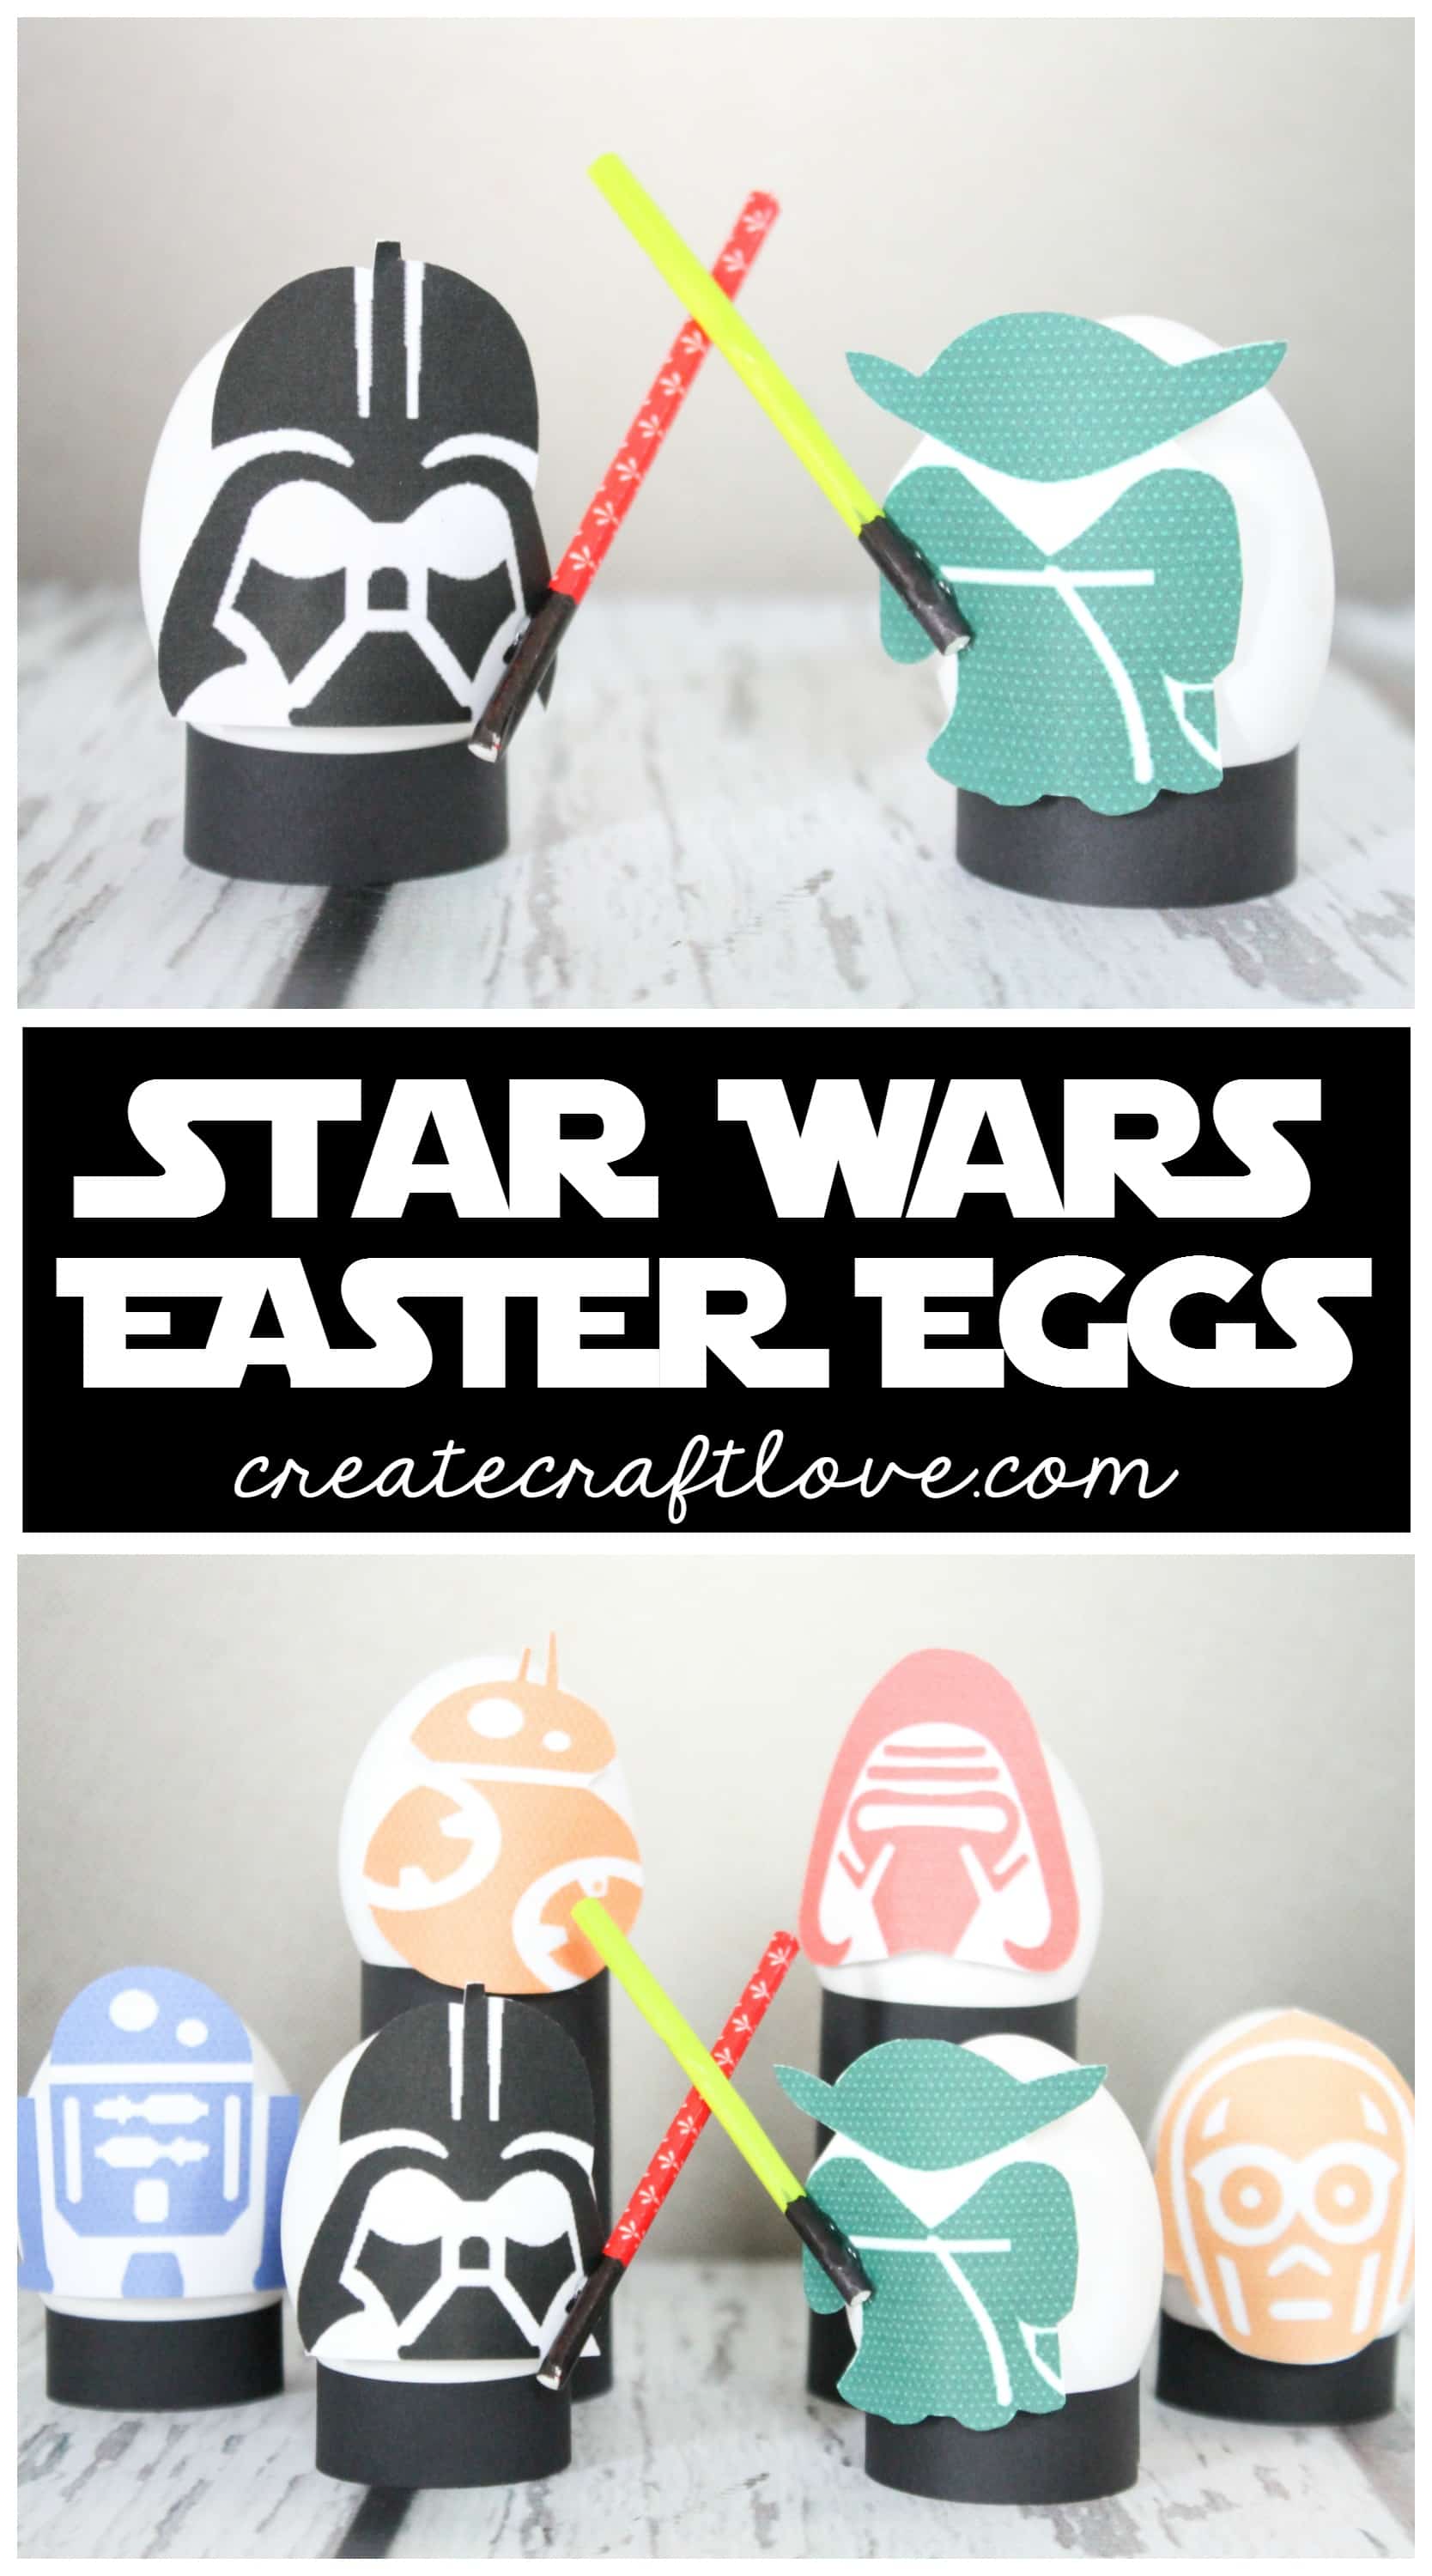 These Star Wars Easter Eggs are exactly what you were looking for!